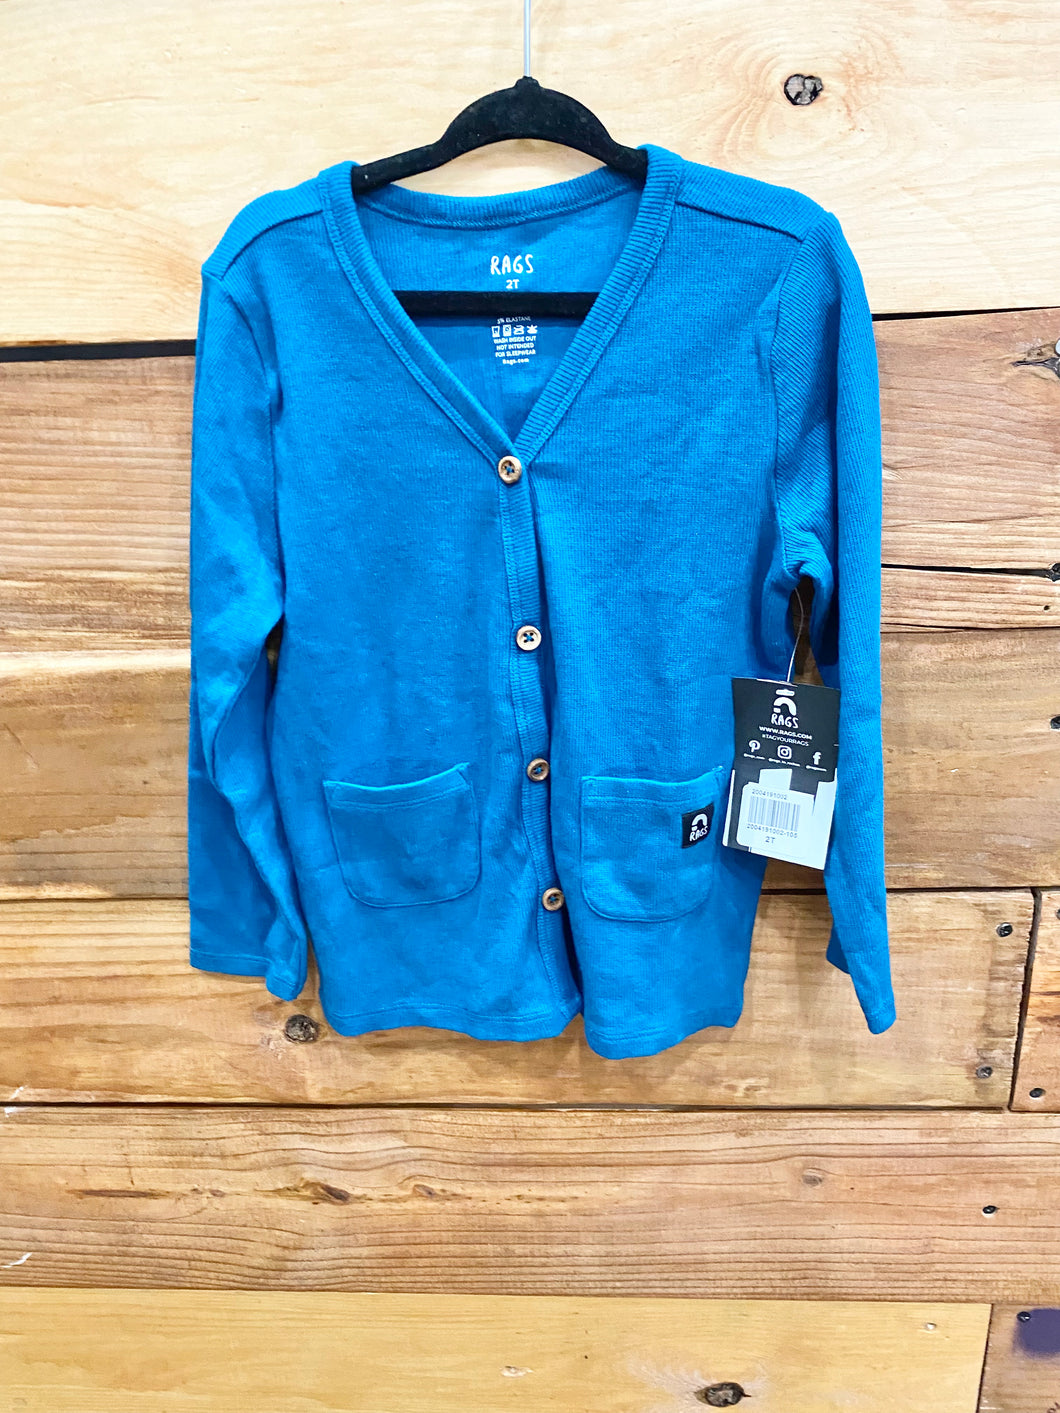 RAGS Blue Cardigan Size 2T